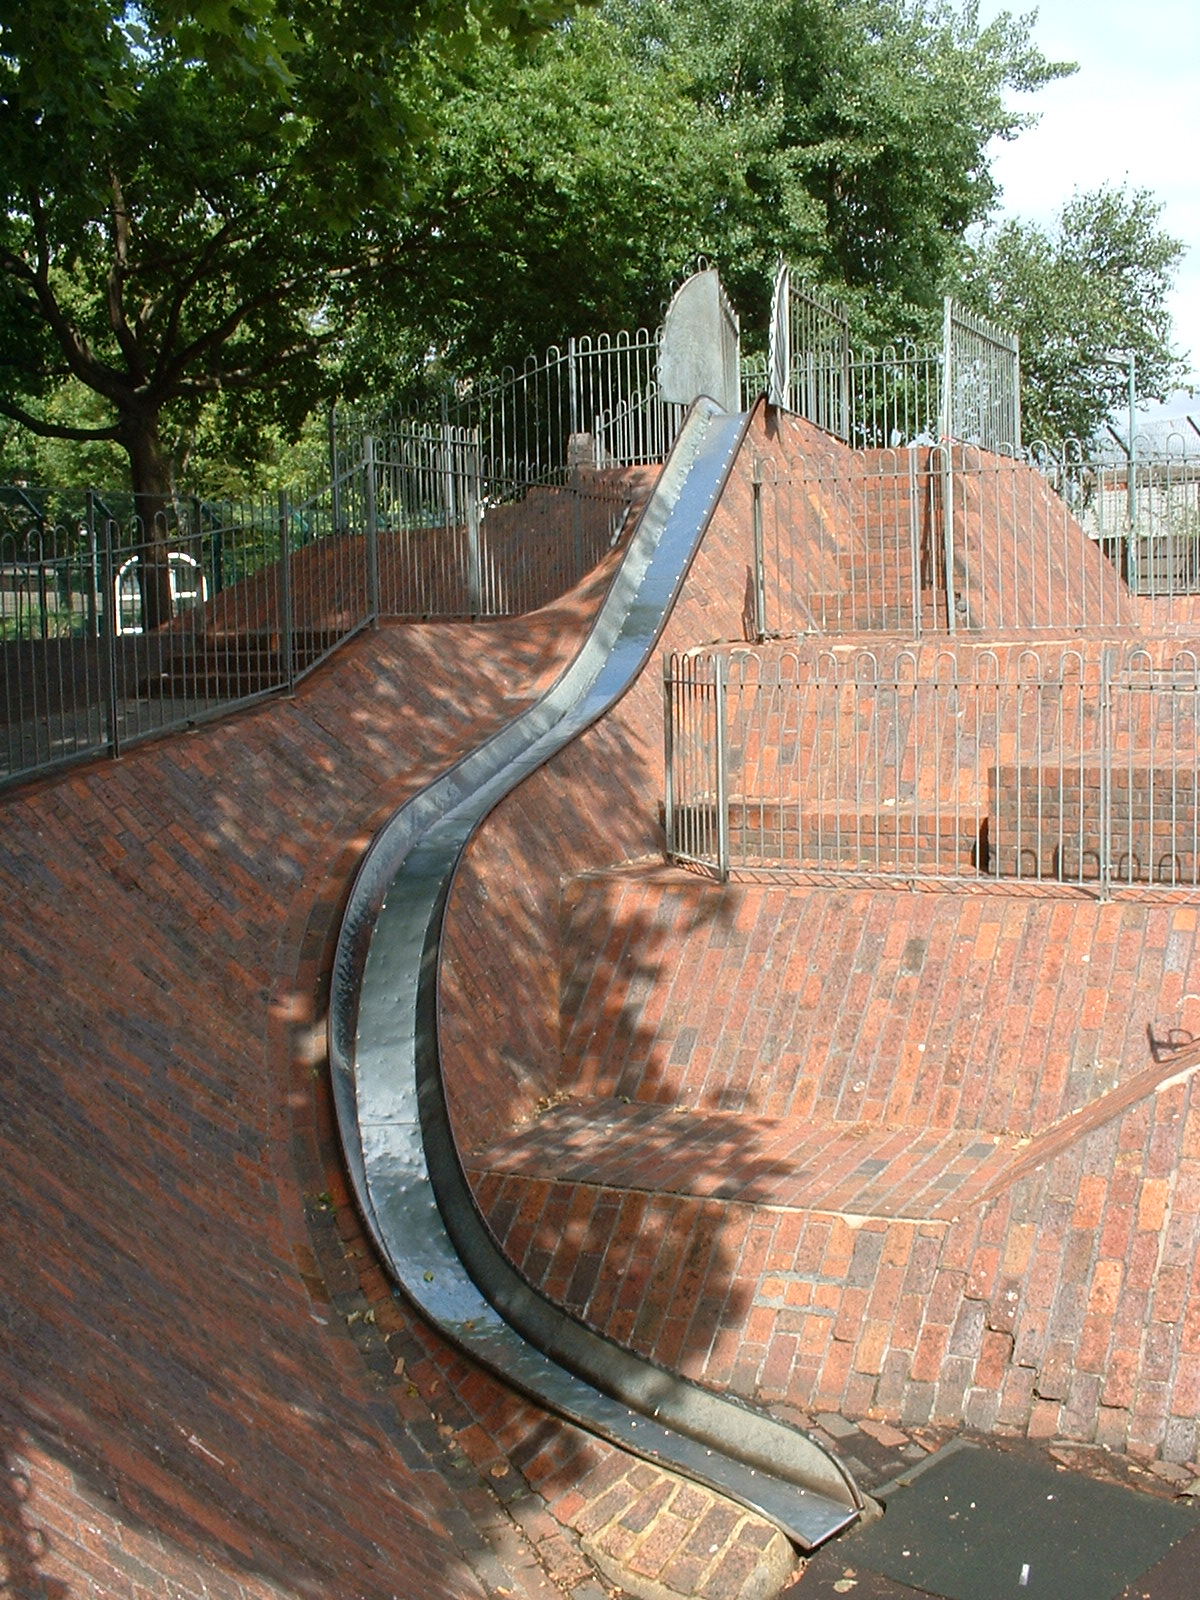 Close up image of the play area at Brunel Estate in 2017, with new railings added and ladder rungs removed